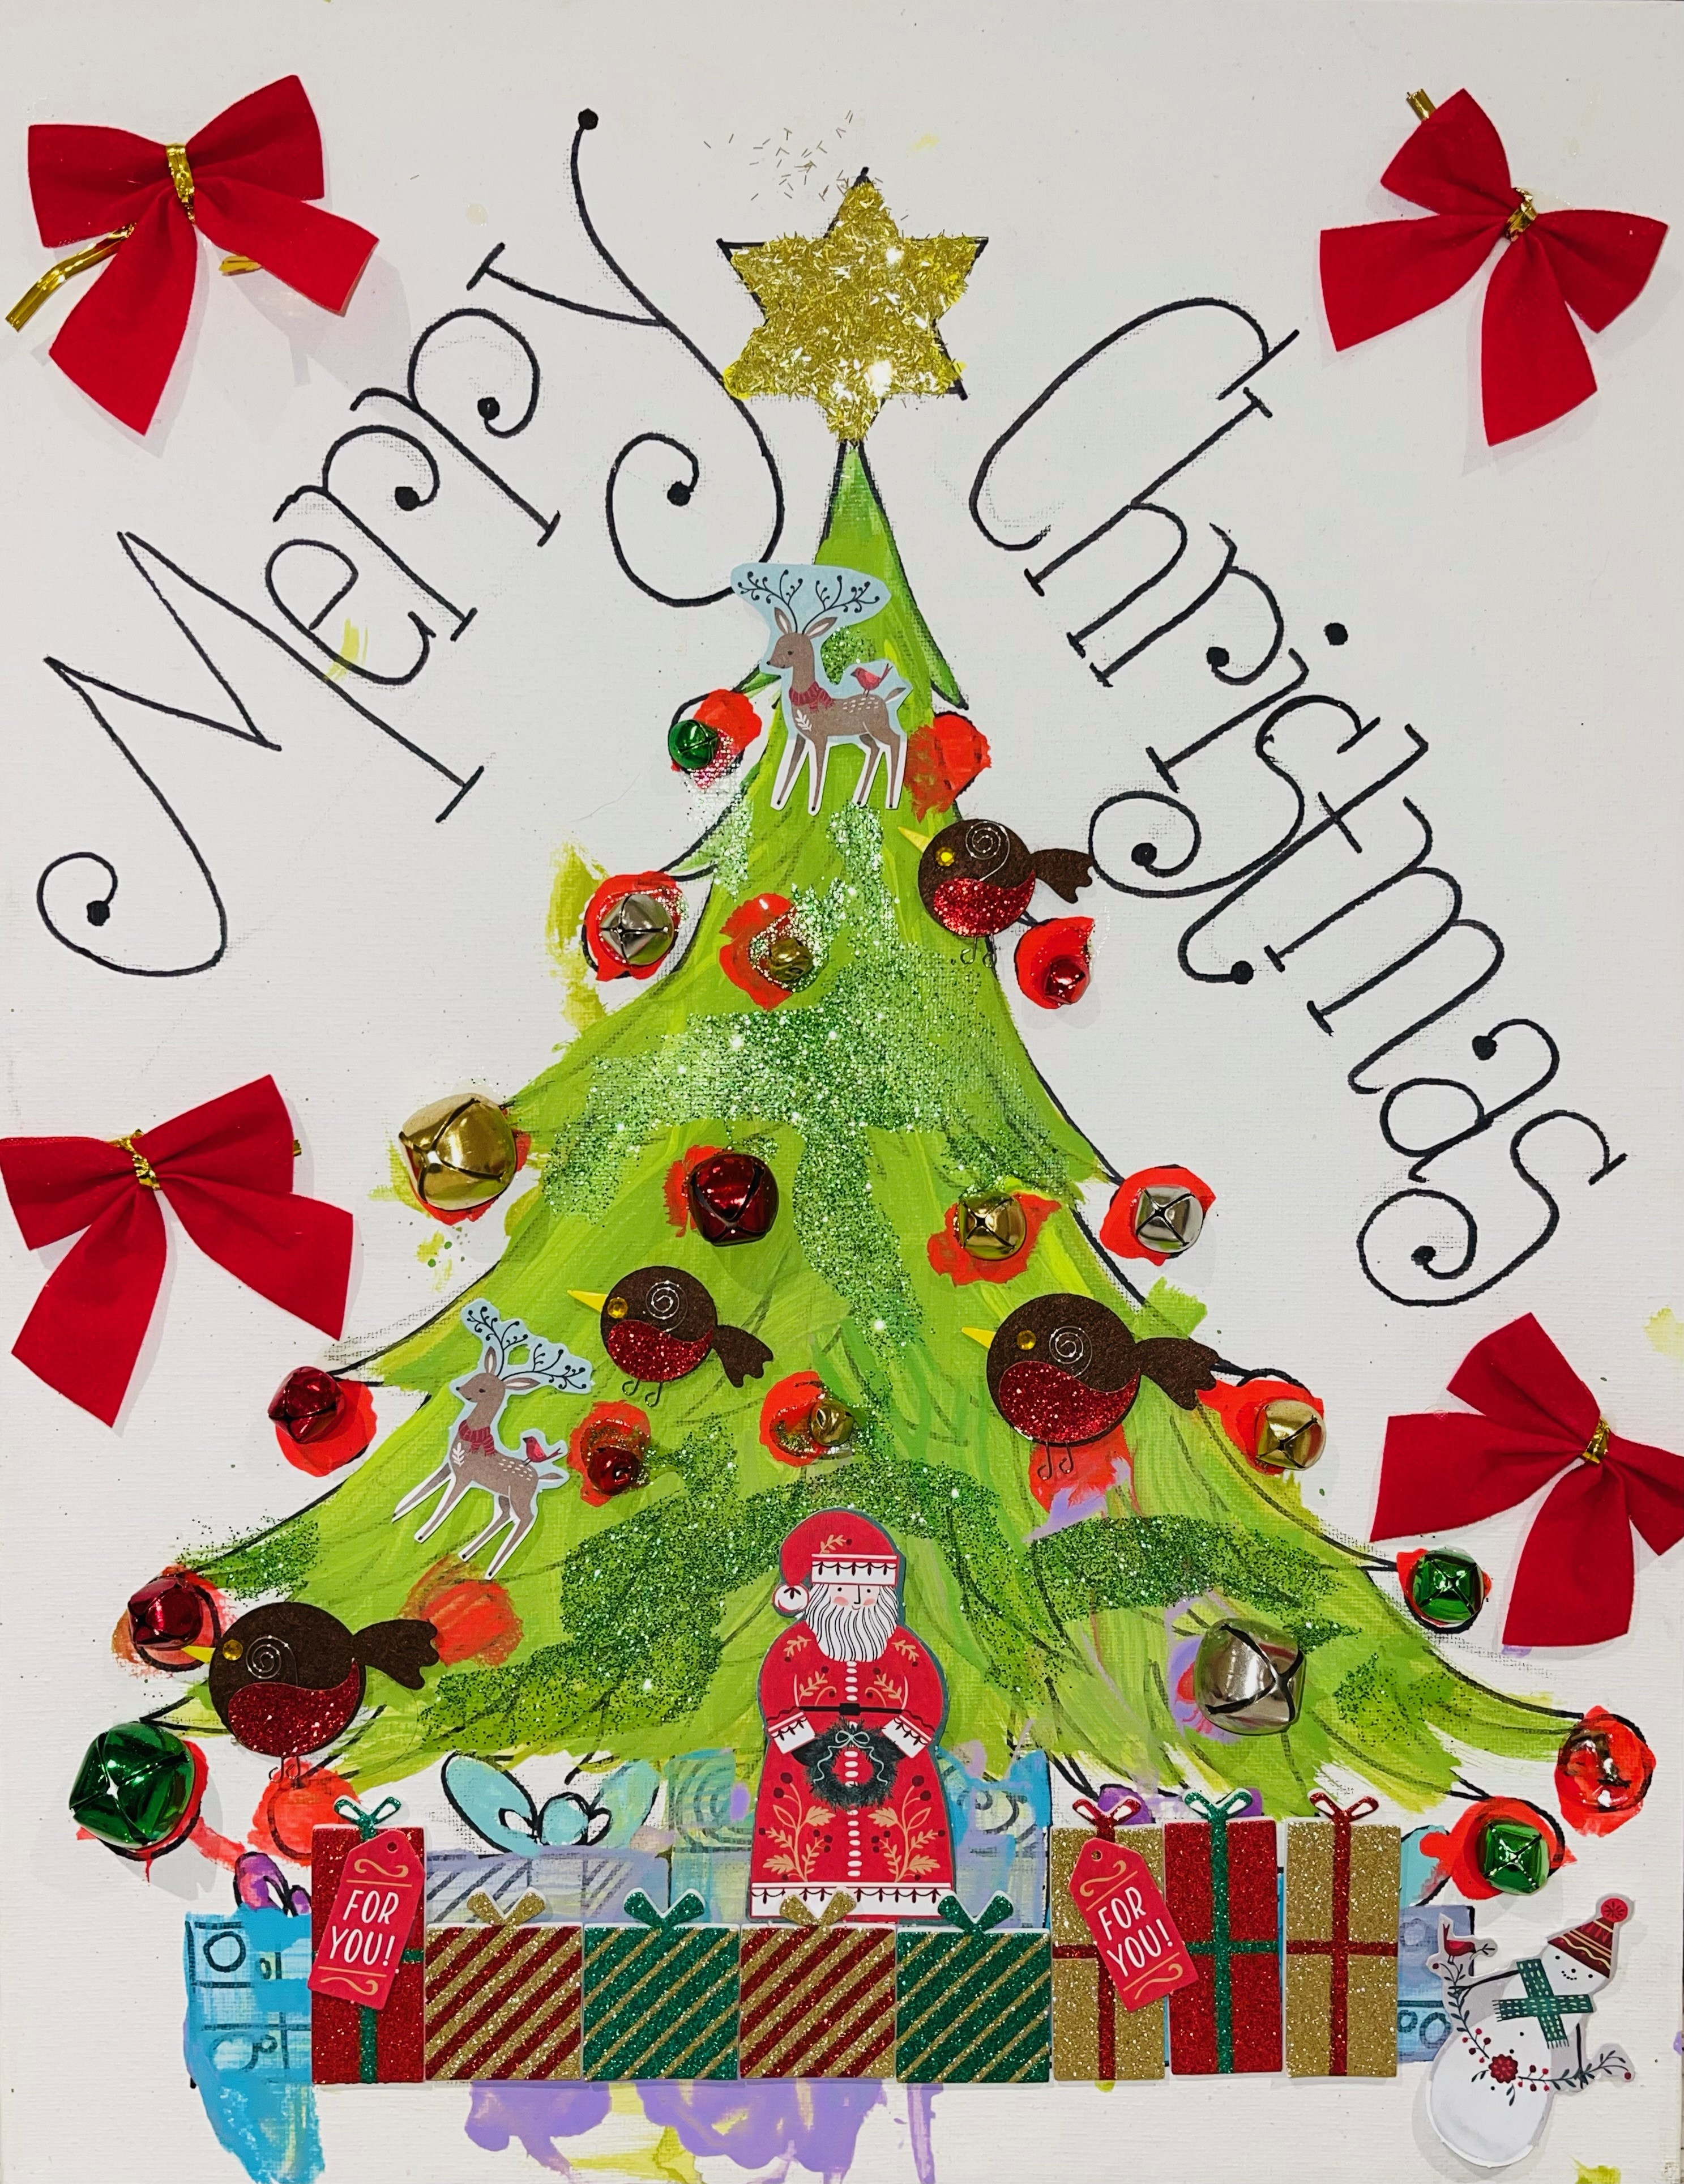 Aueriela Saunders' Christmas card entry. It features a Christmas tree and Father Christmas.